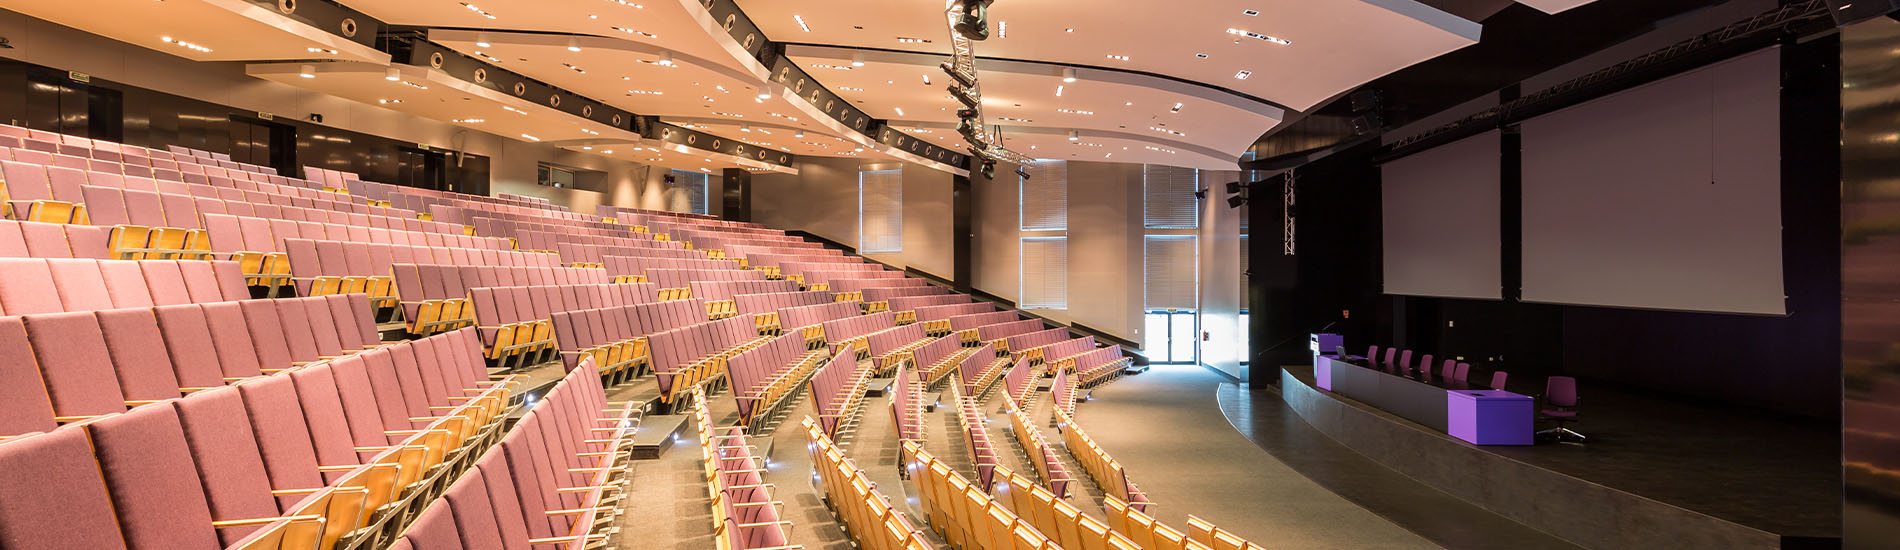 conference-hall-where-NENA-i3-standards-breakout-session-on-next-generation-9-1-1-will-be-held-currently-empty-with-auditorium-like-seats-and-stage-at-the-front-for-speaker